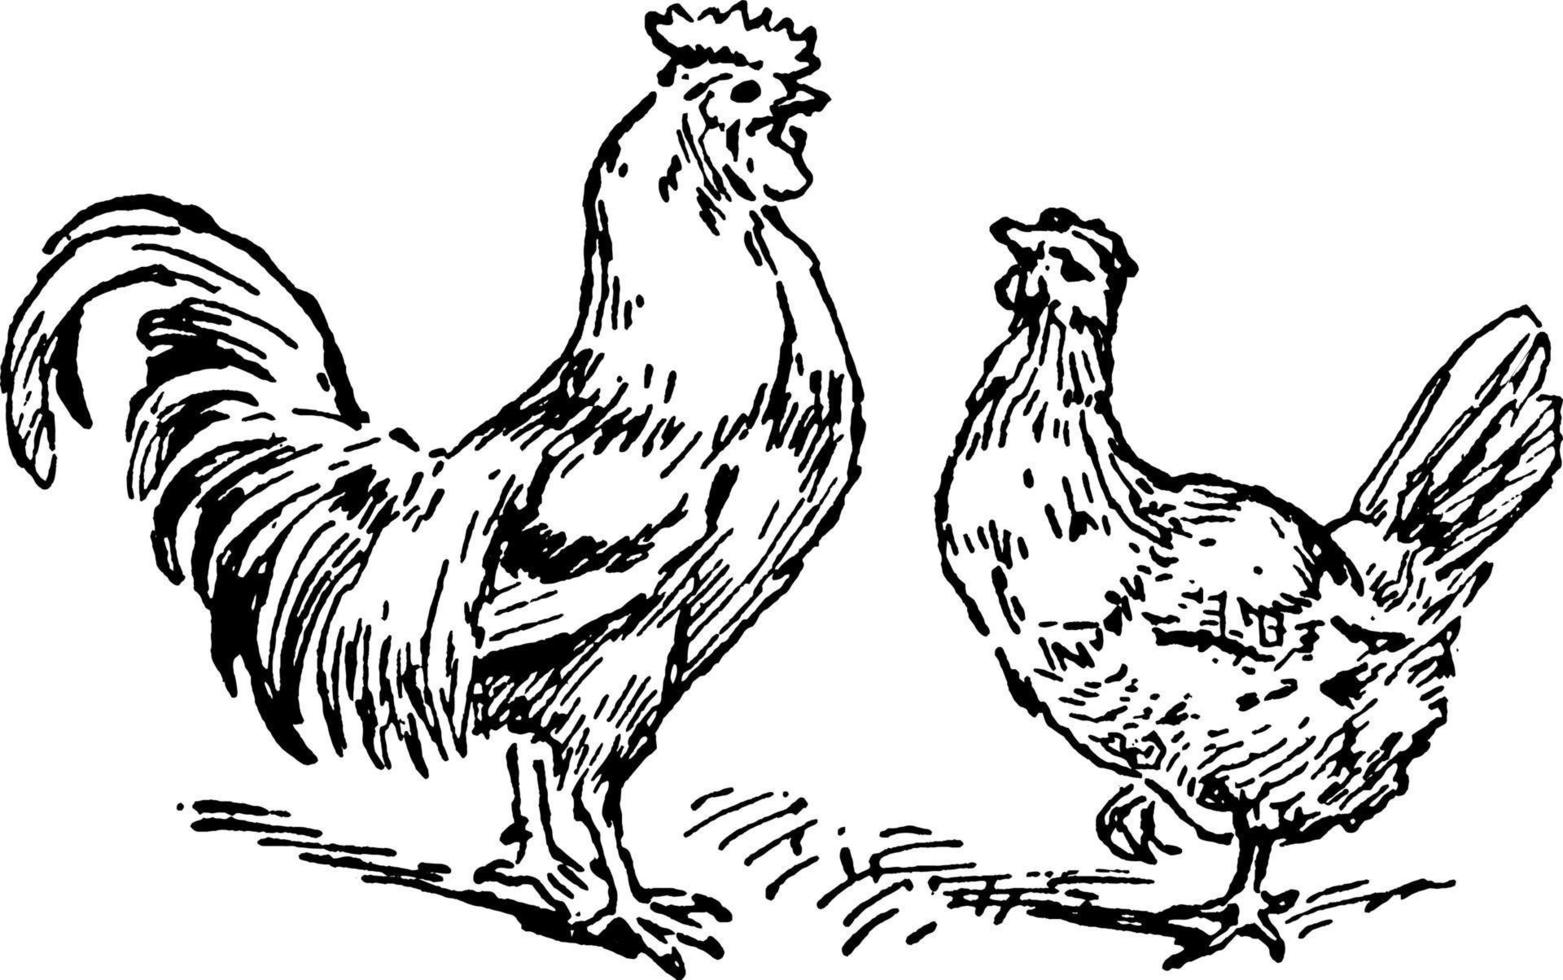 Rooster and Hen or Gallus domesticus, vintage illustration. vector